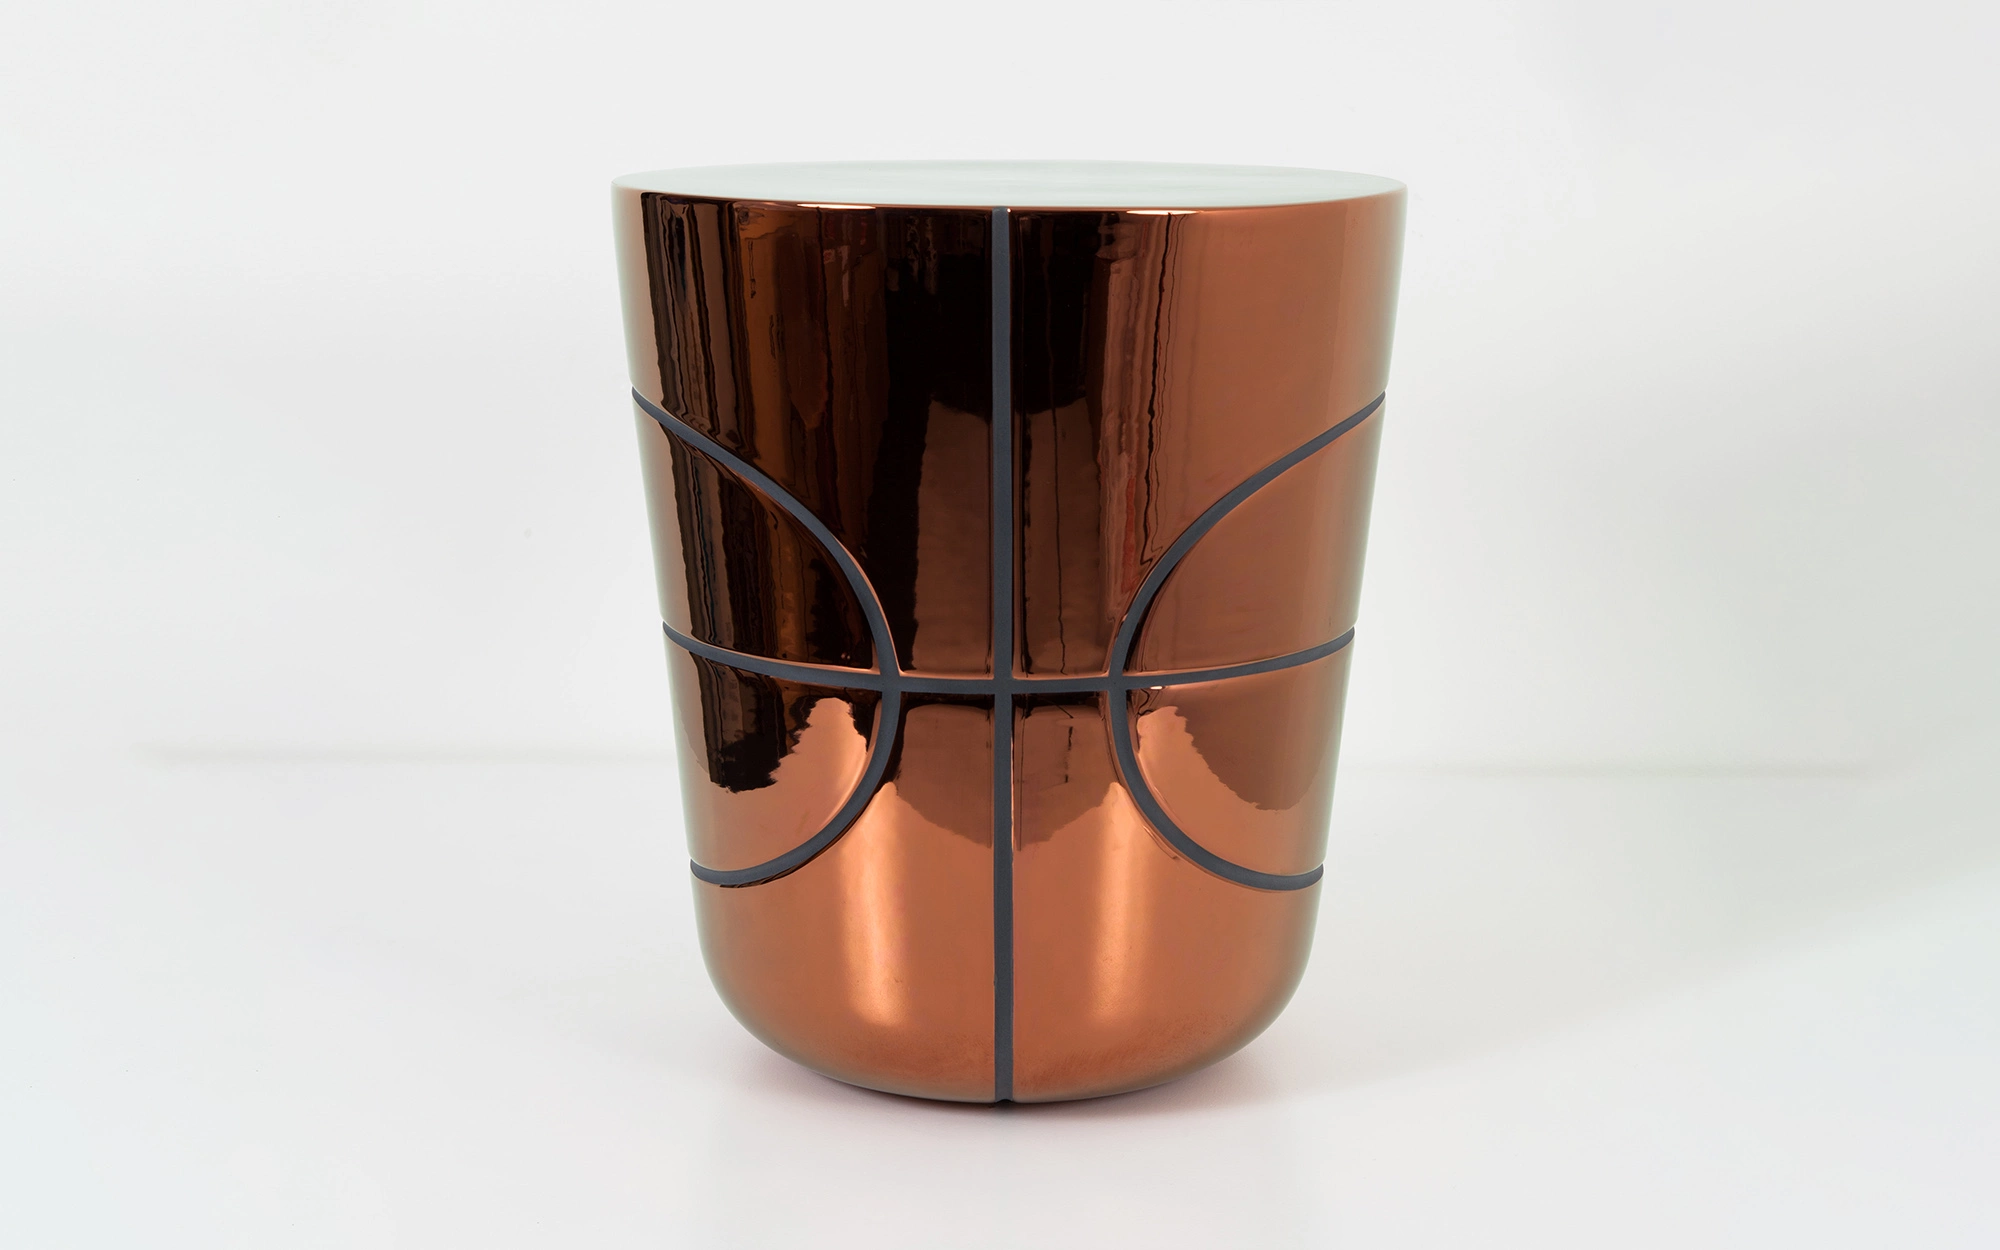 Game On Side Table - Copper Ceramic - Jaime Hayon - Bench - Galerie kreo